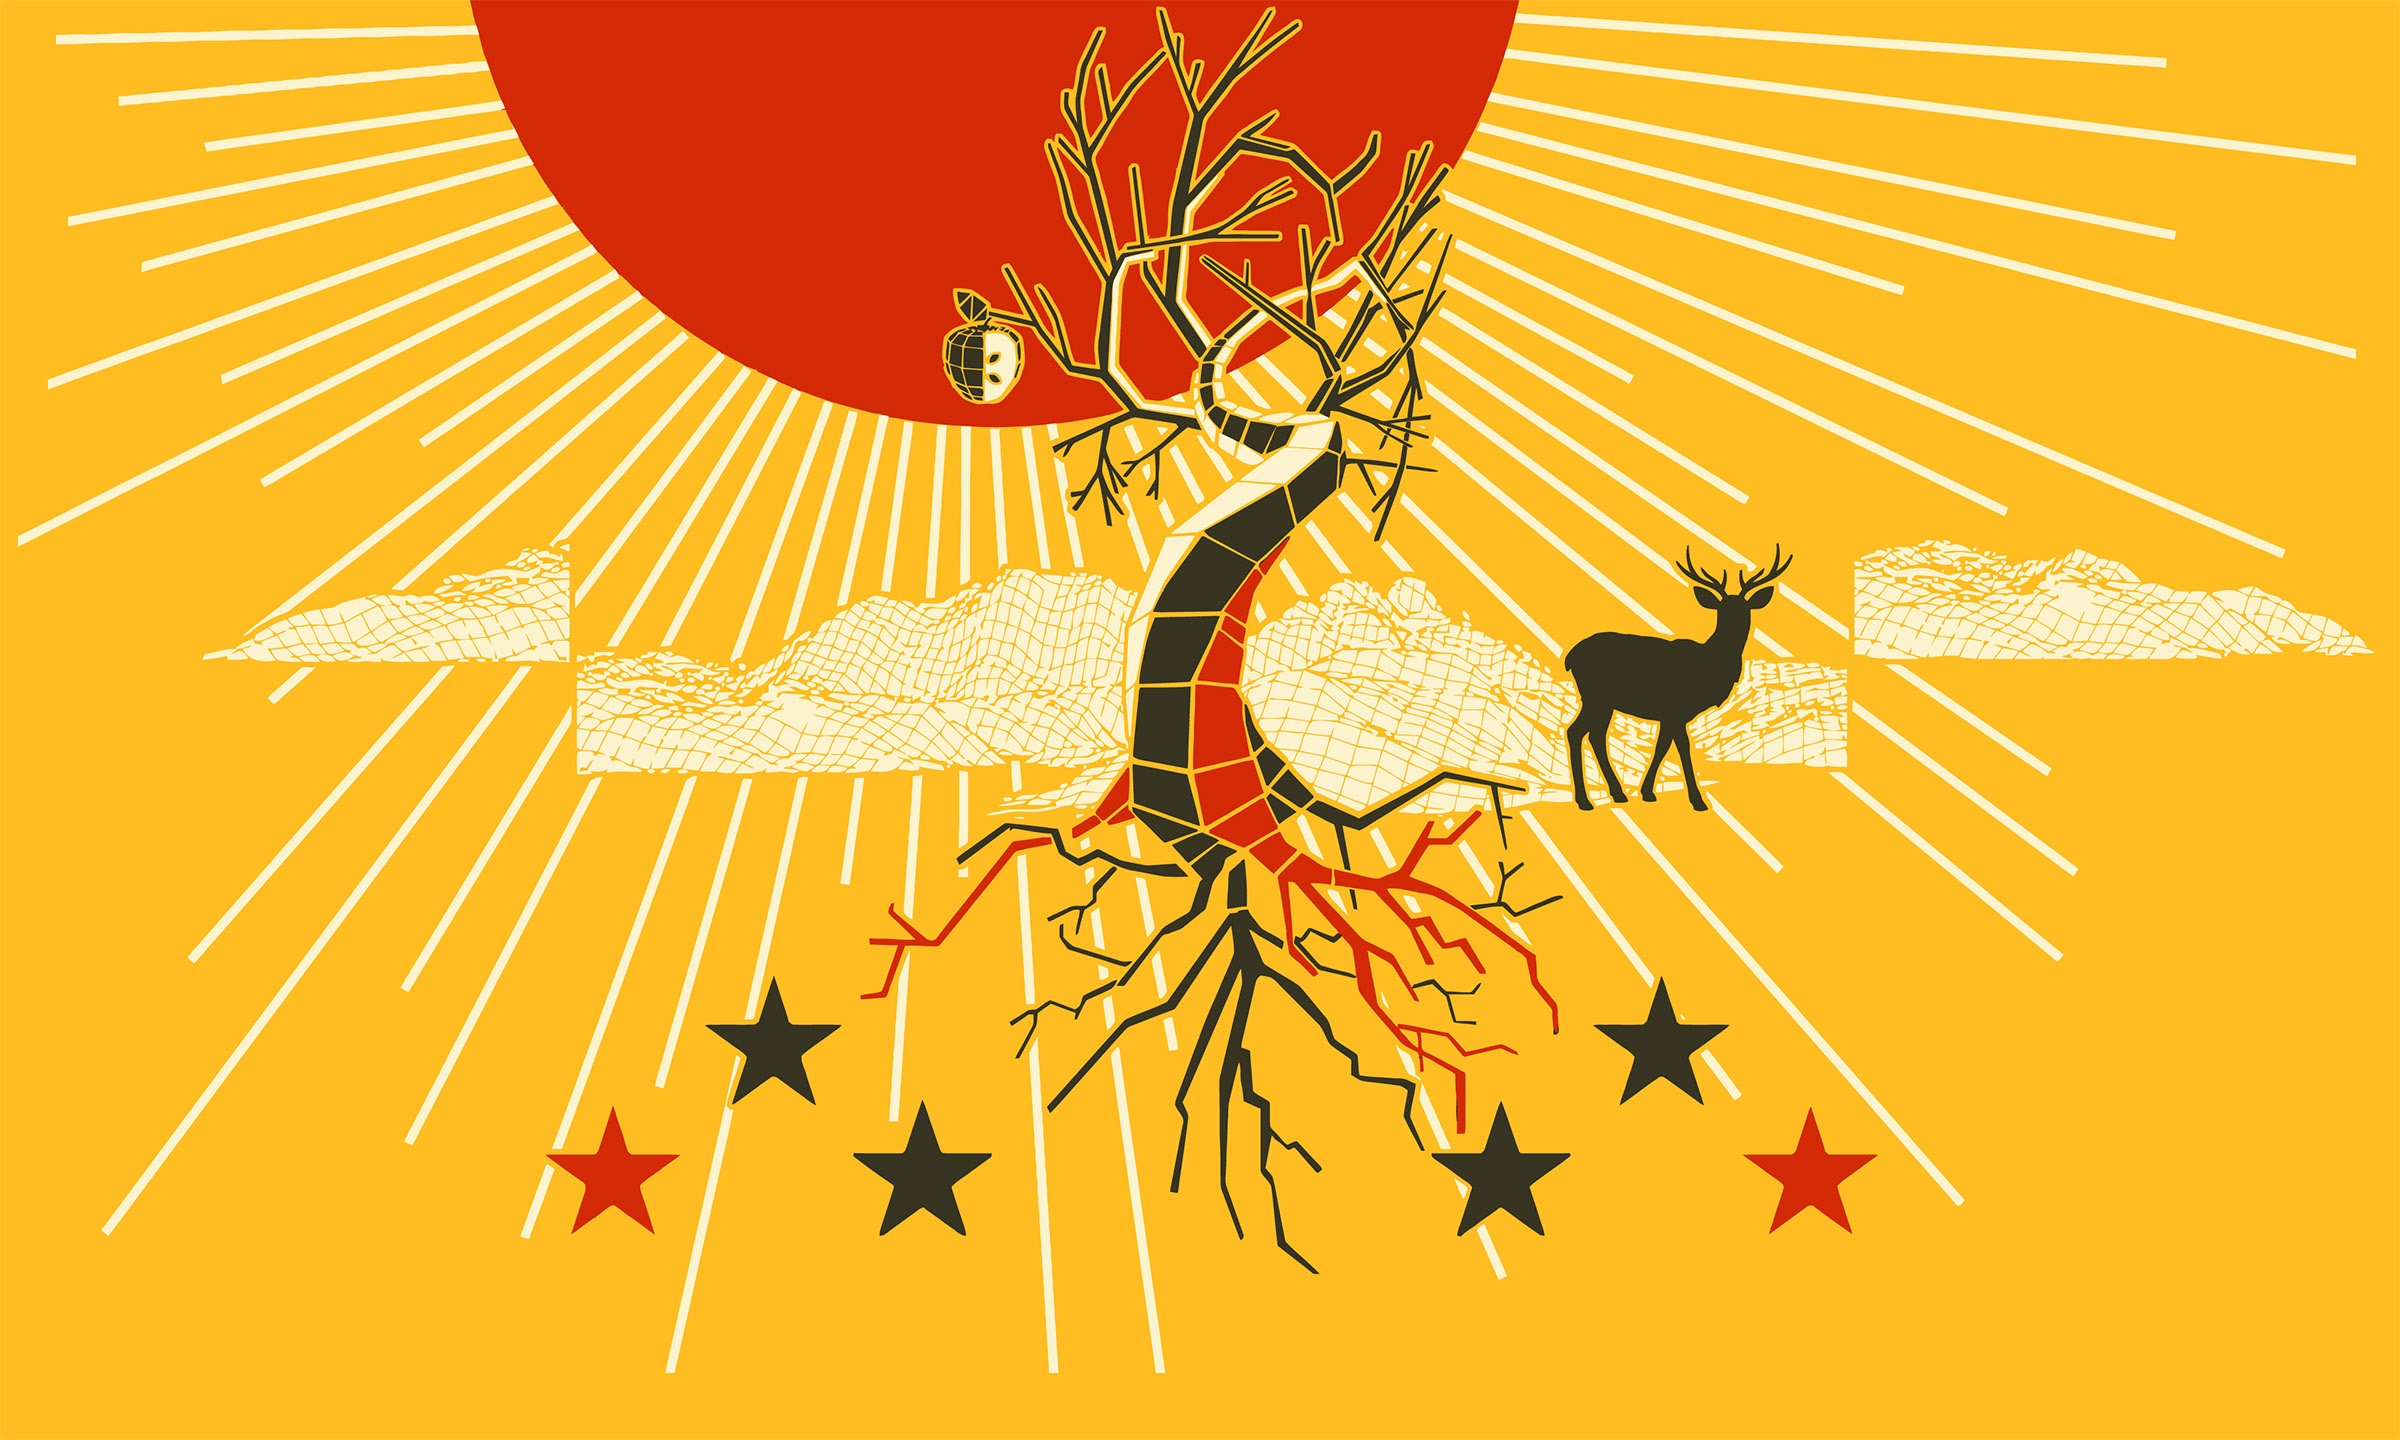 A flag with a yellow background and a red sun, as well as a deer or elk-like figure near a tree in the foreground.